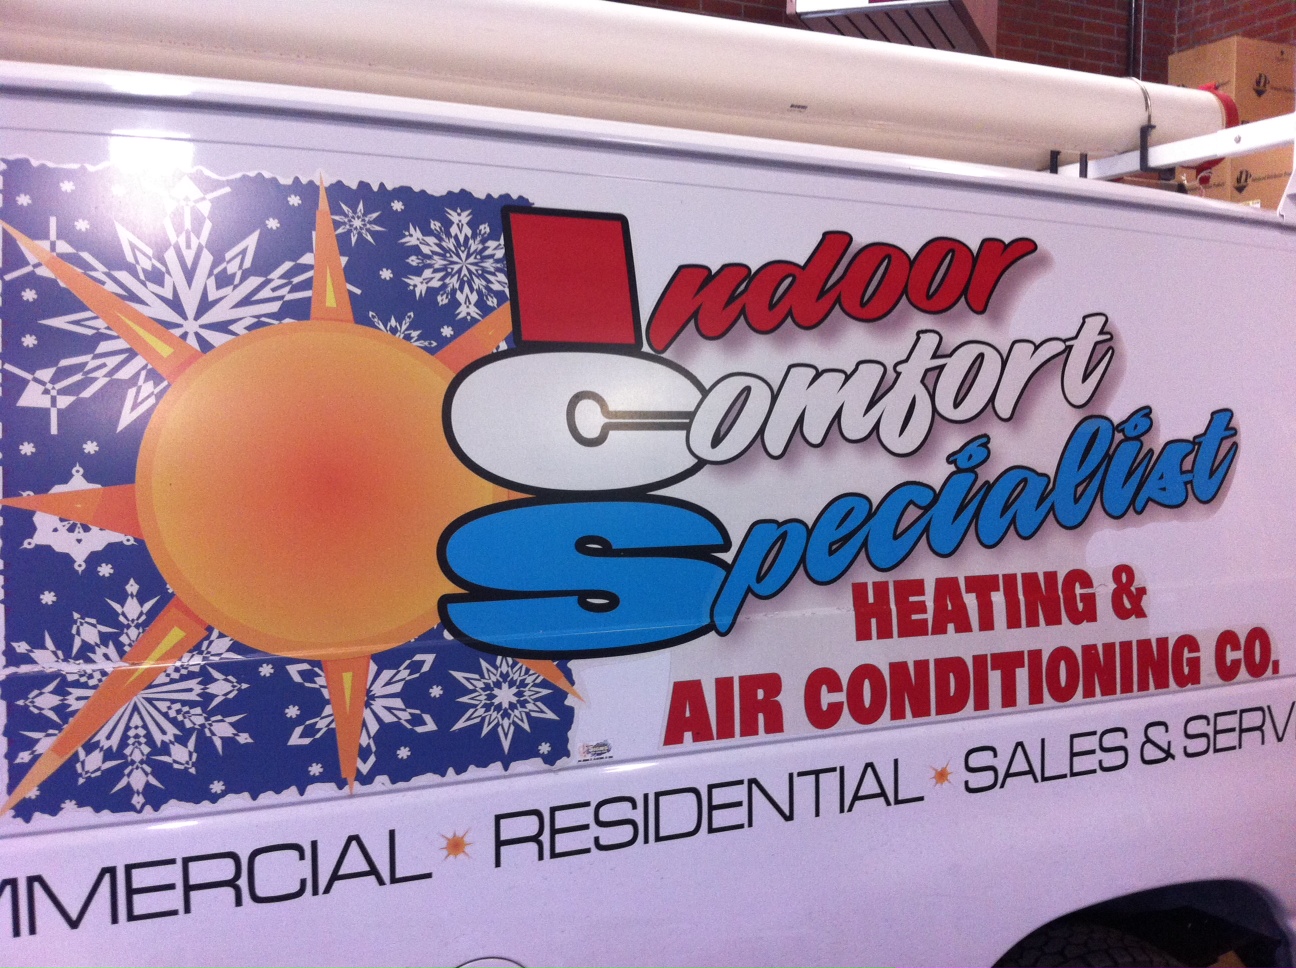 ICS Heating & Air Conditioning Co